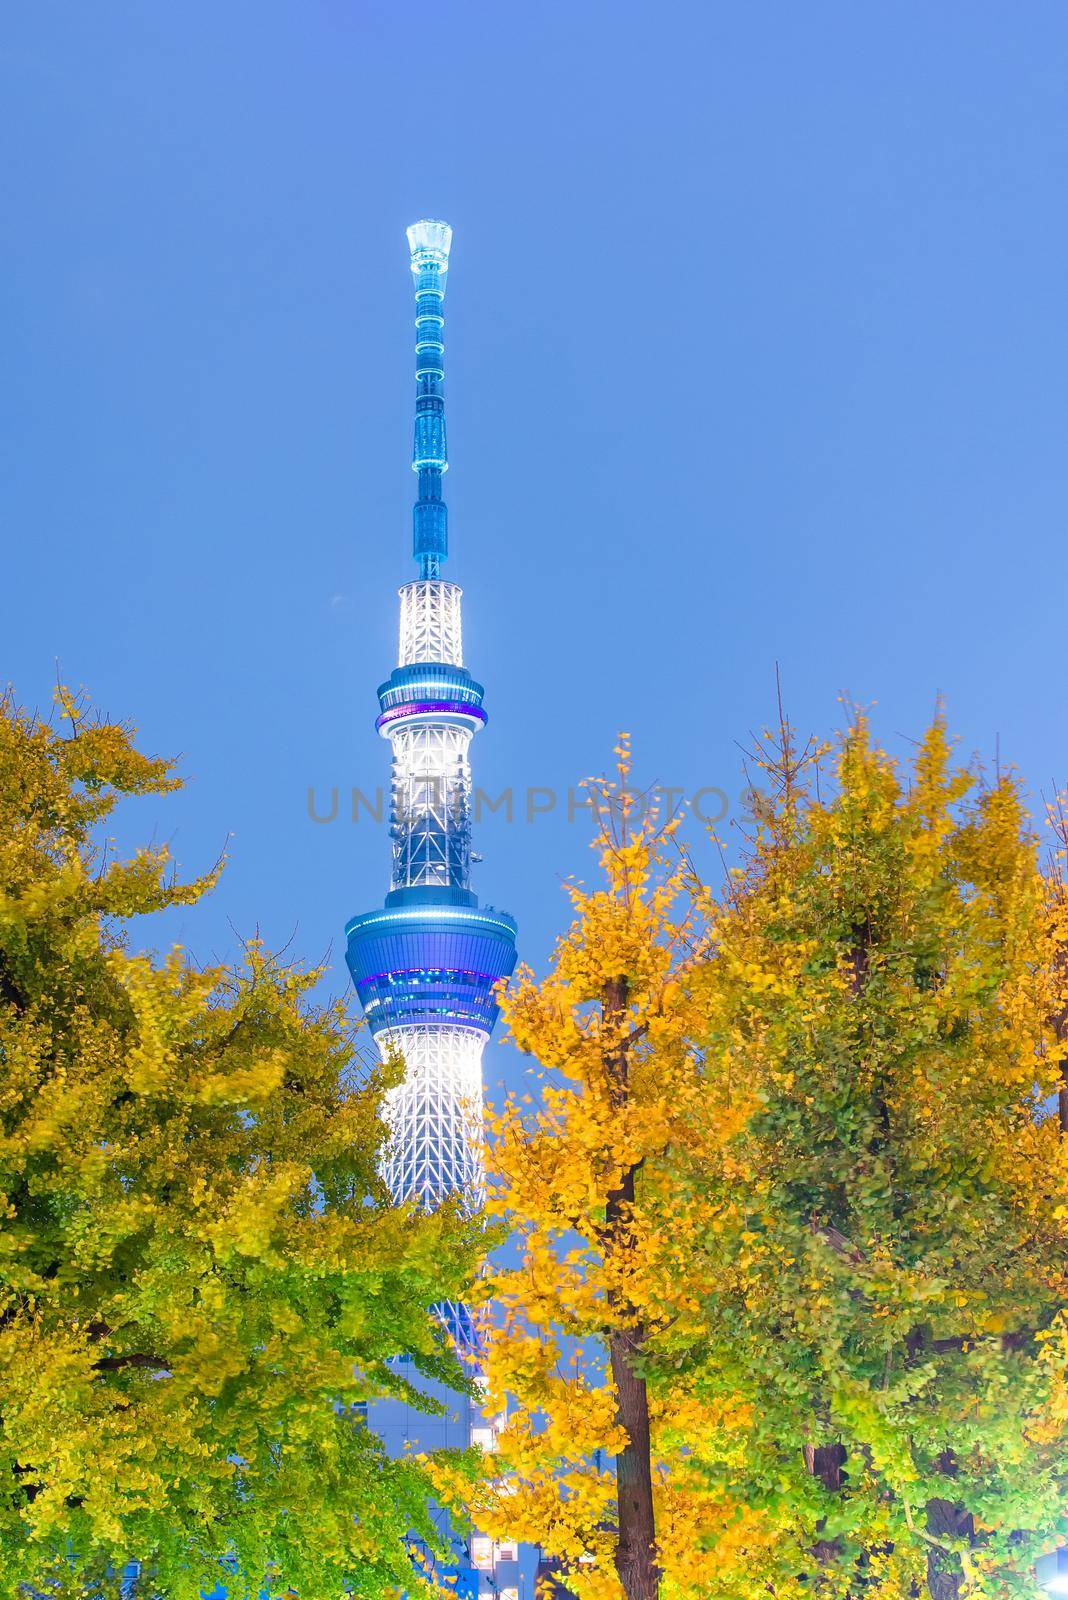 The Tokyo Skytree a new television broadcasting tower and landmark of Tokyo at night in Japan